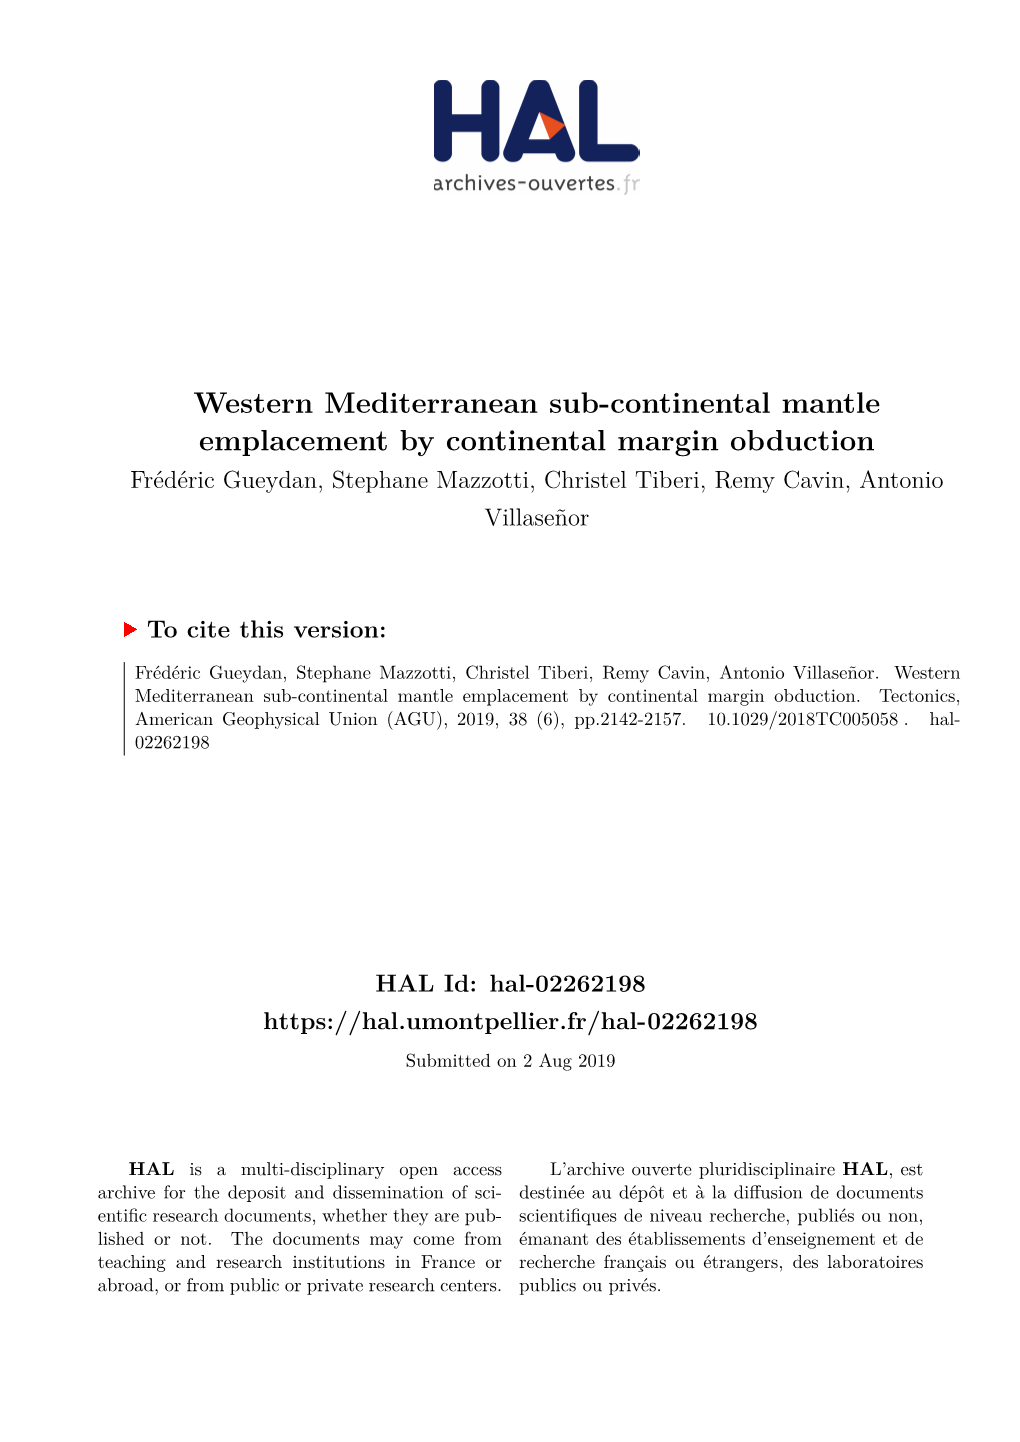 Western Mediterranean Sub-Continental Mantle Emplacement by Continental Margin Obduction